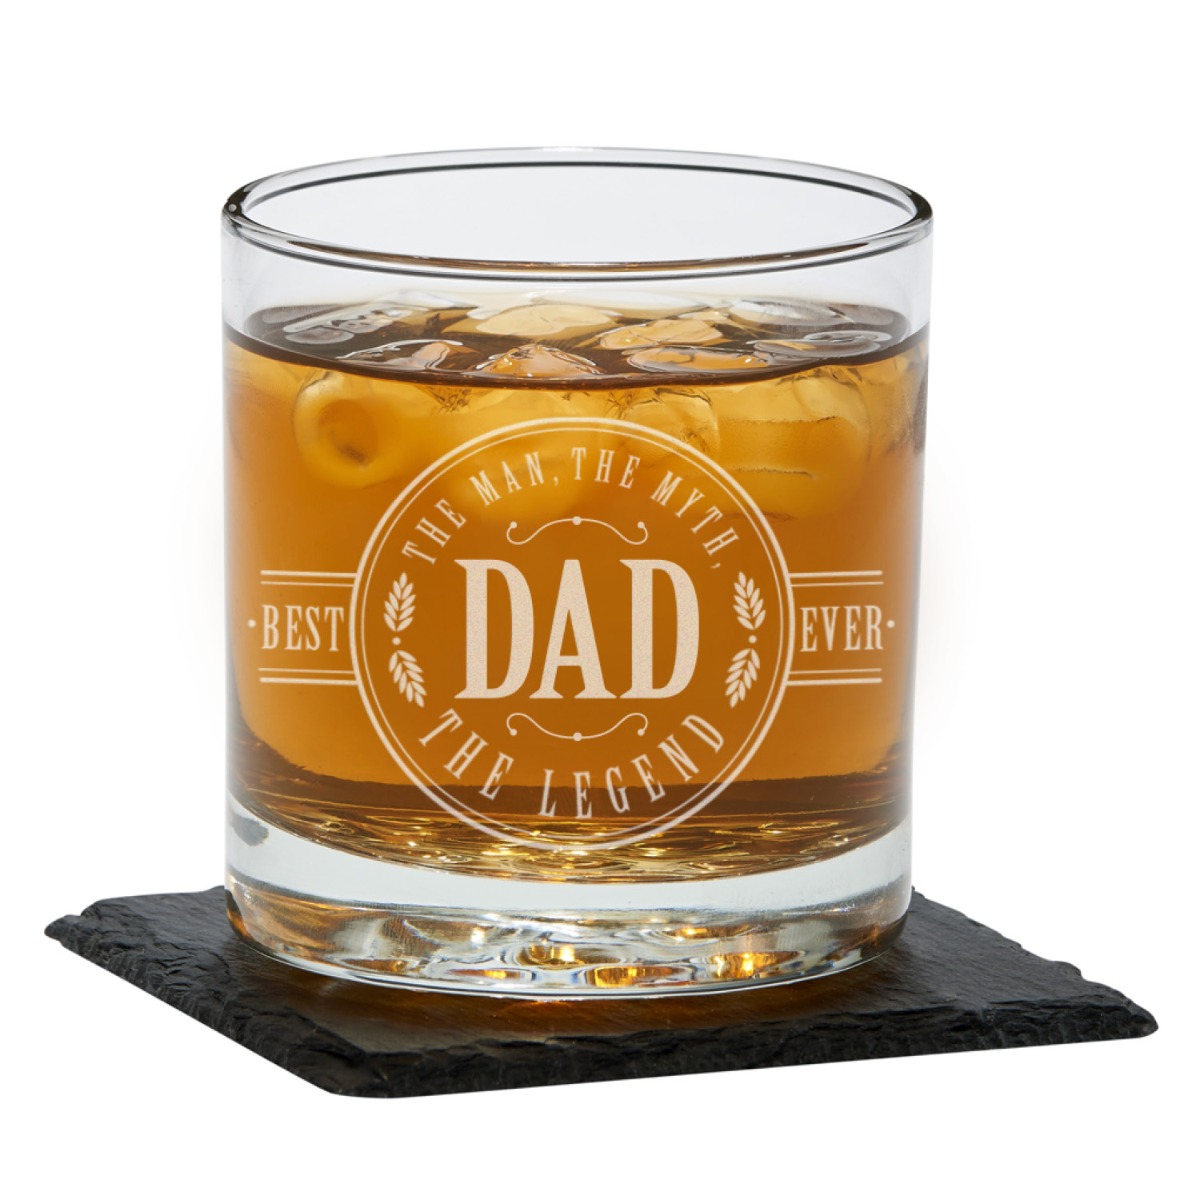 Best dad ever whiskey glass